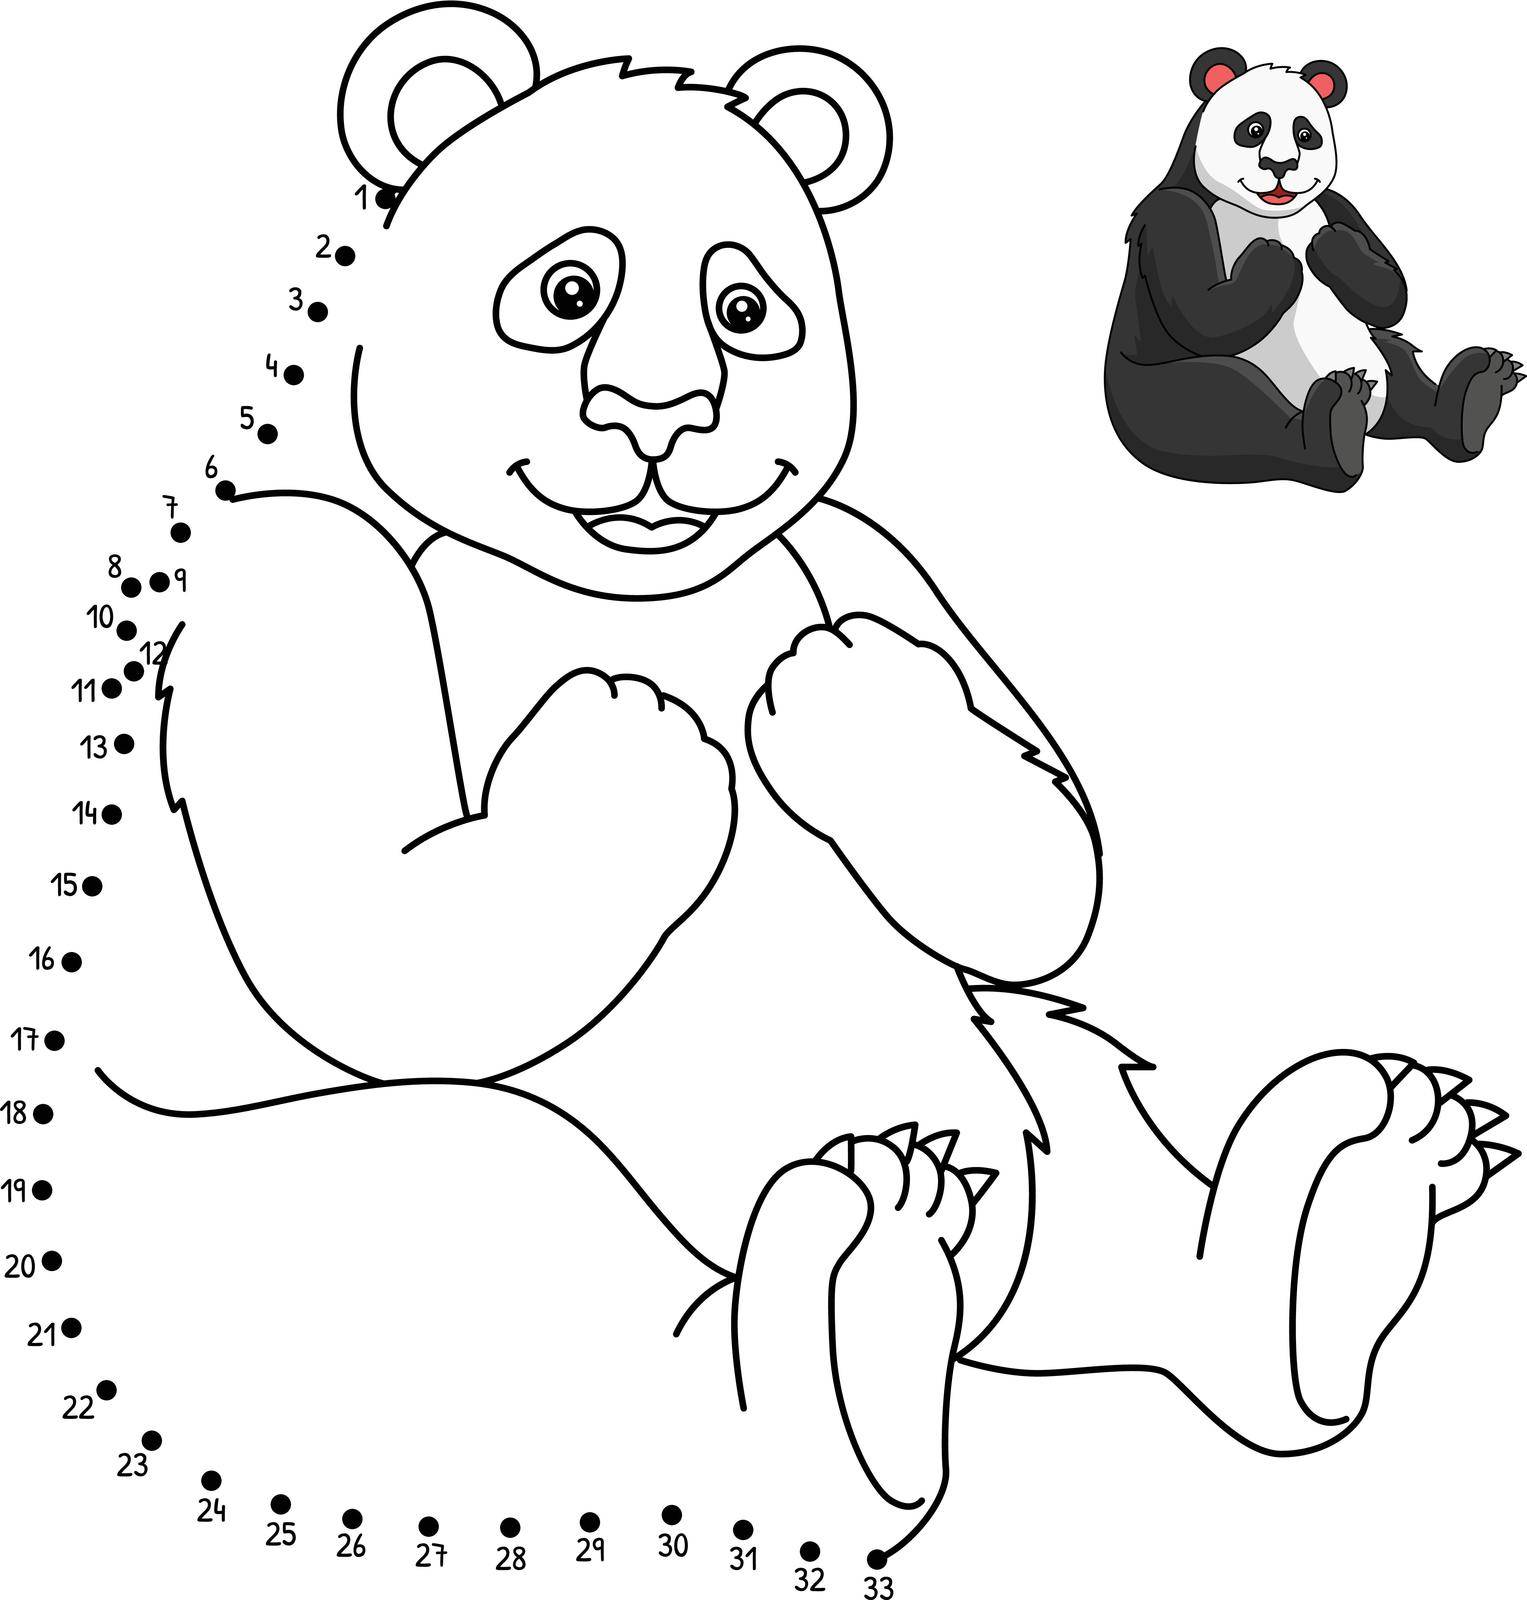 A cute and funny connect-the-dots coloring page of a Panda. Provides hours of coloring fun for children. Color, this page is very easy. Suitable for little kids and toddlers.